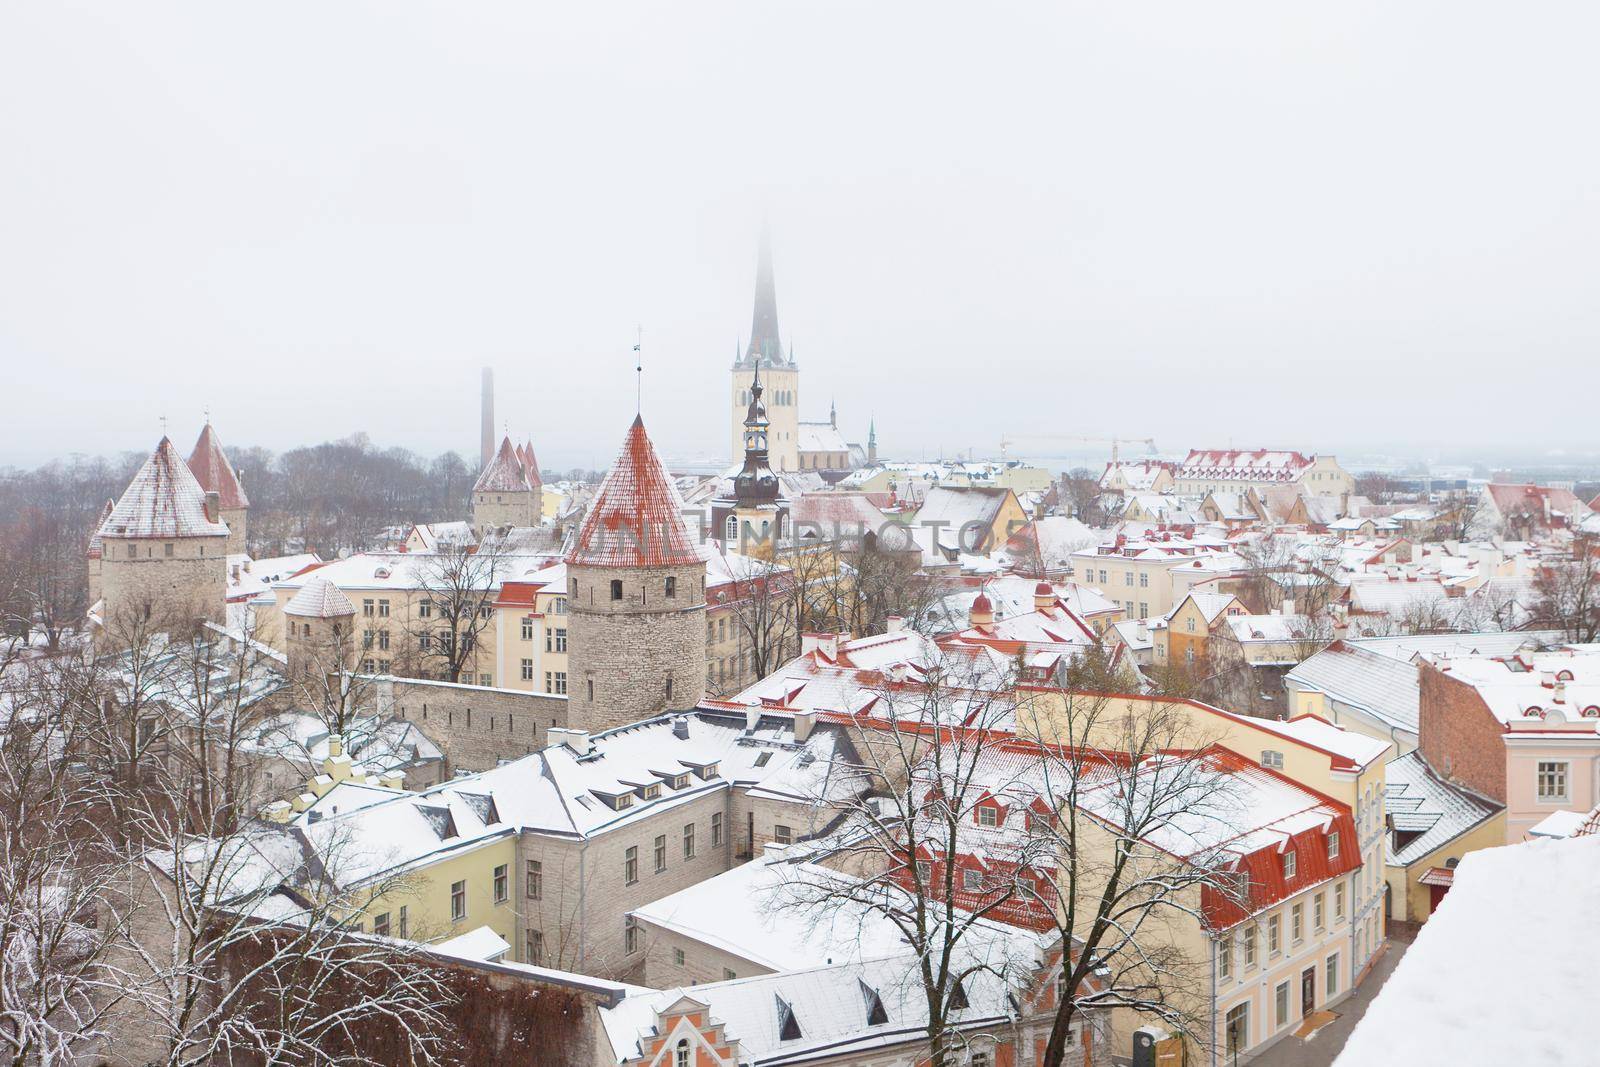 Tower of the city wall and Oleviste Catholic Church at the Old city of Tallinn in Estonia at the winter time. Gothic Scandinavian architecture of medieval charming Old Town and snow. Panoramic view